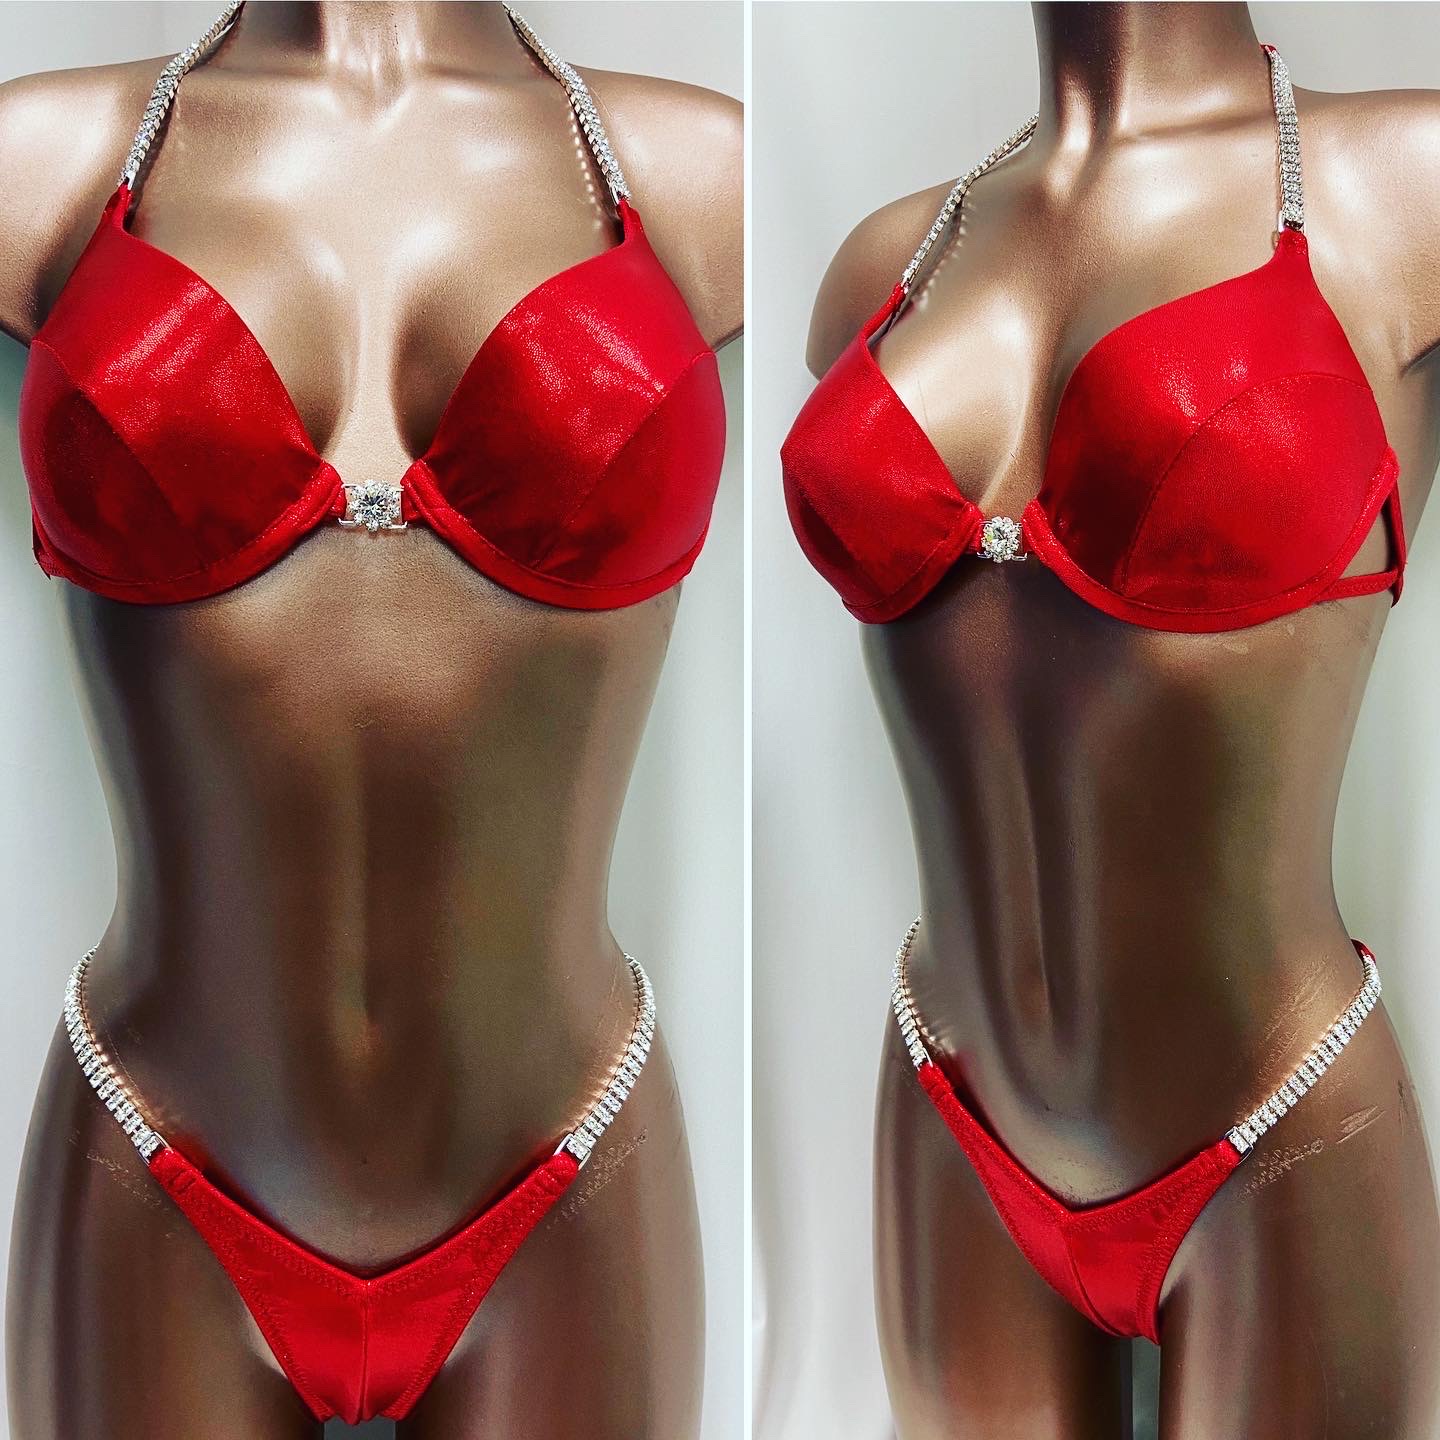 B push up underwire
V front , xsmall back 
$185 Custom ordered blank